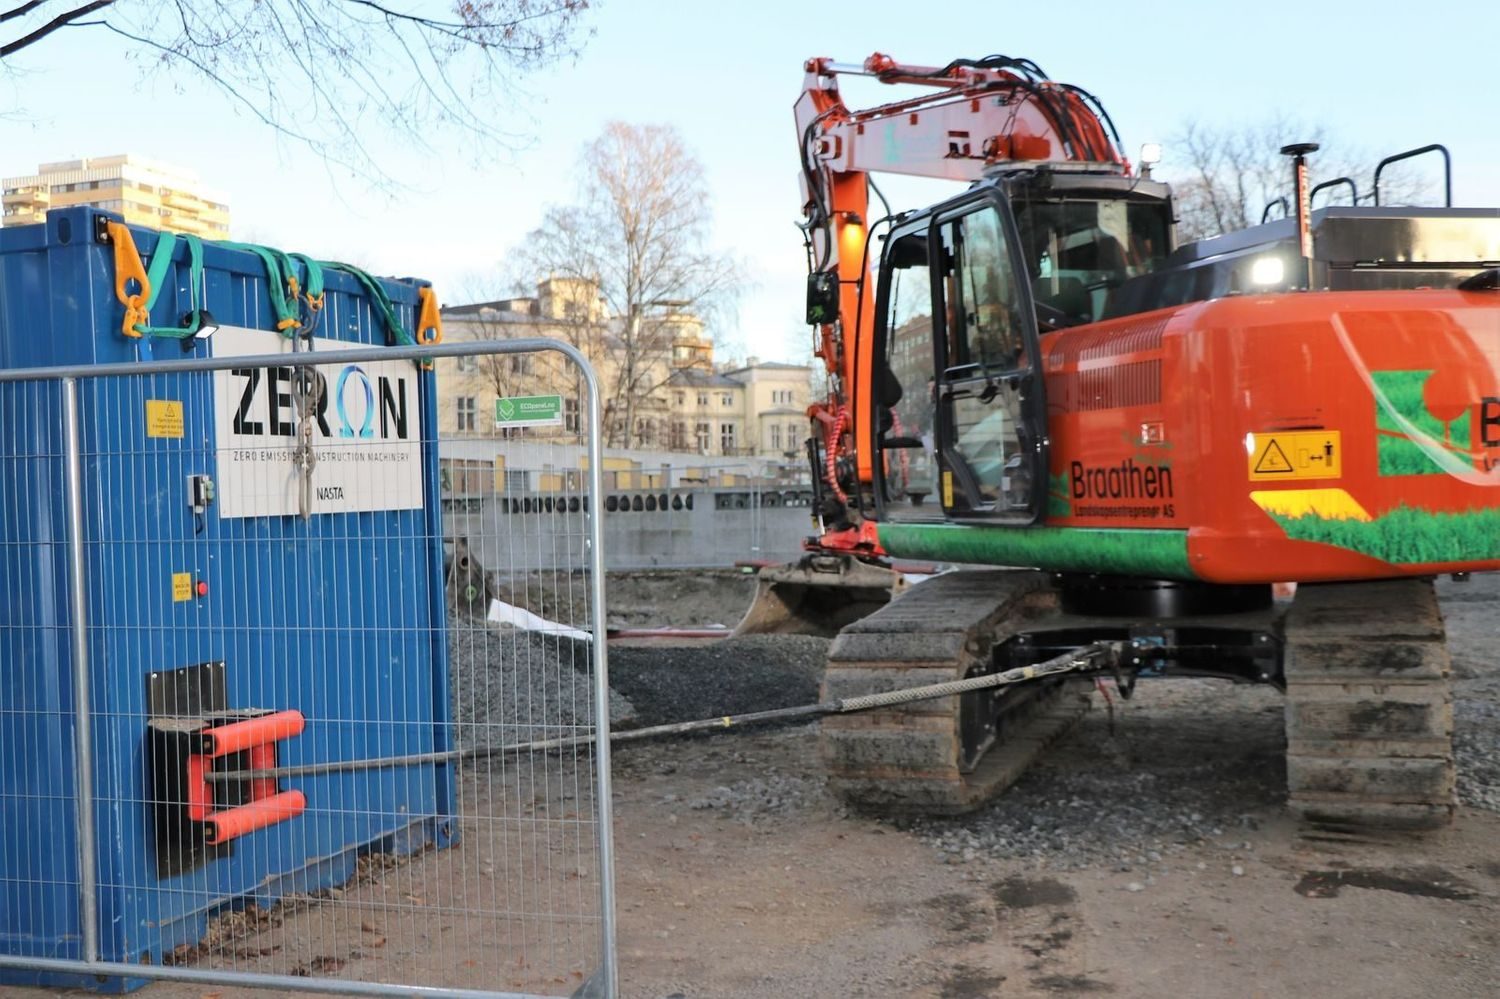 Electrification of heavy-duty transport and the construction sector in Oslo towards 2030